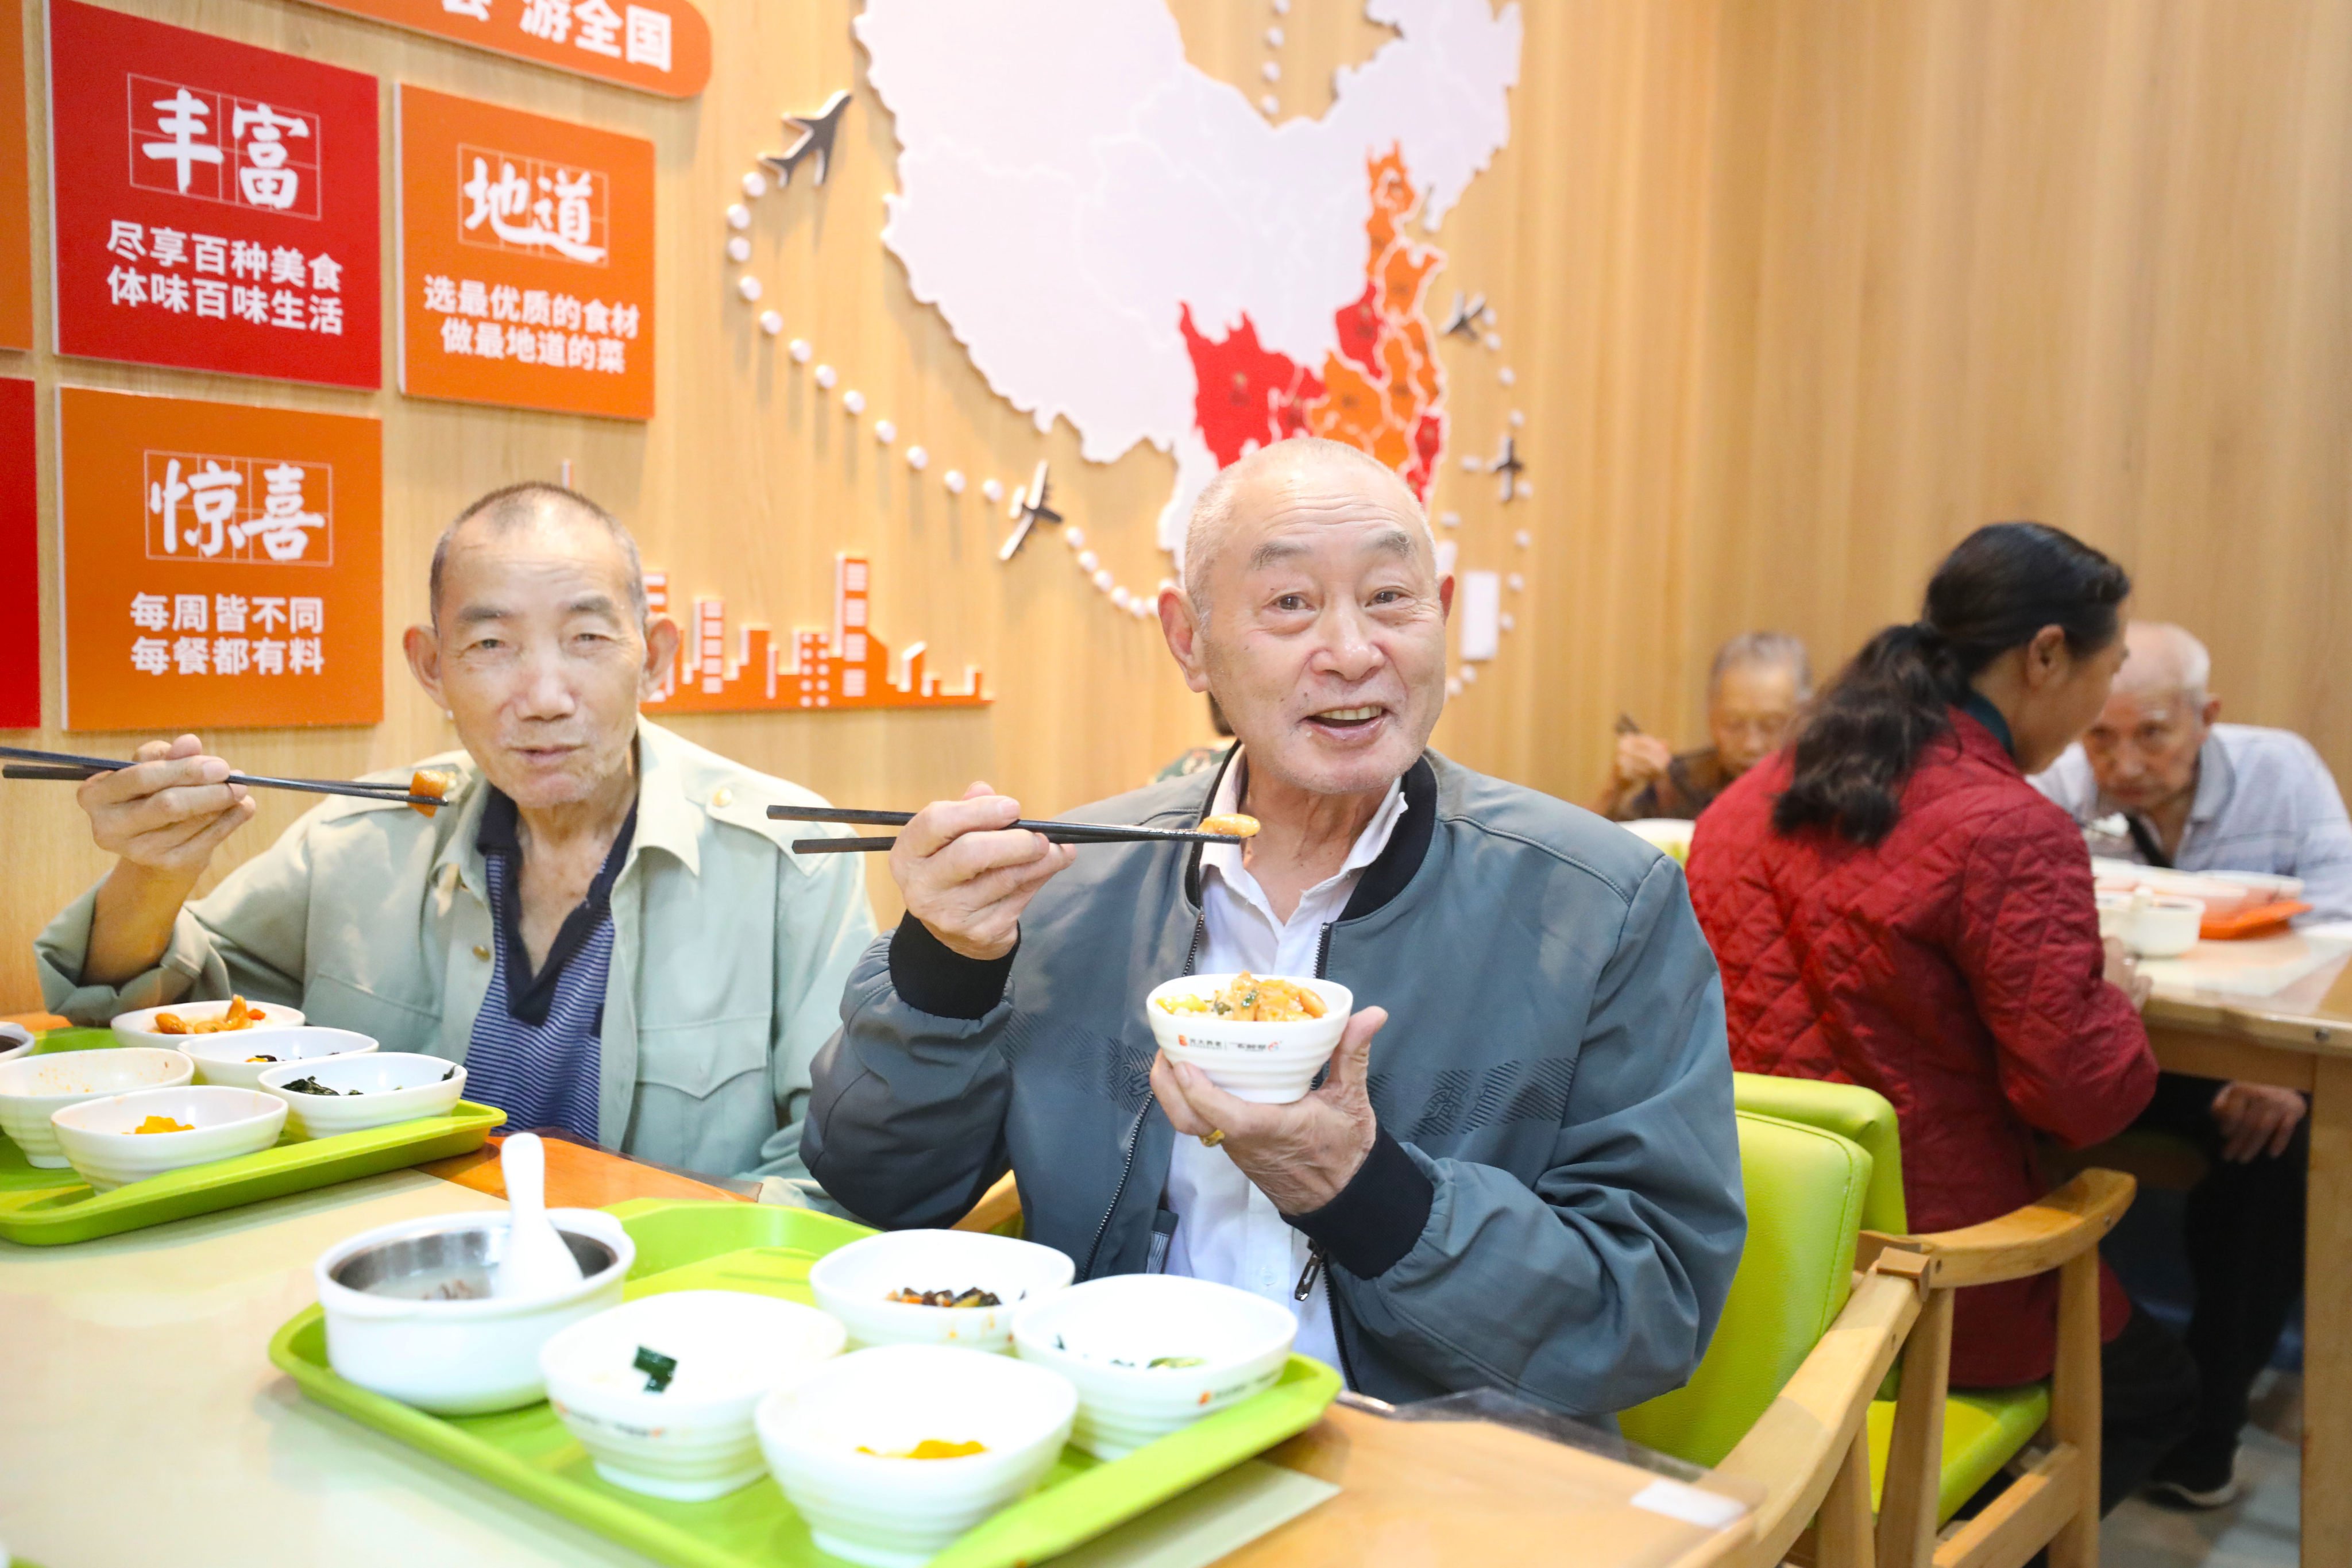 Some Chinese seniors have reportedly been unable to get refunds on prepaid cards for community canteens that have shut down. Photo: NurPhoto via Getty Images